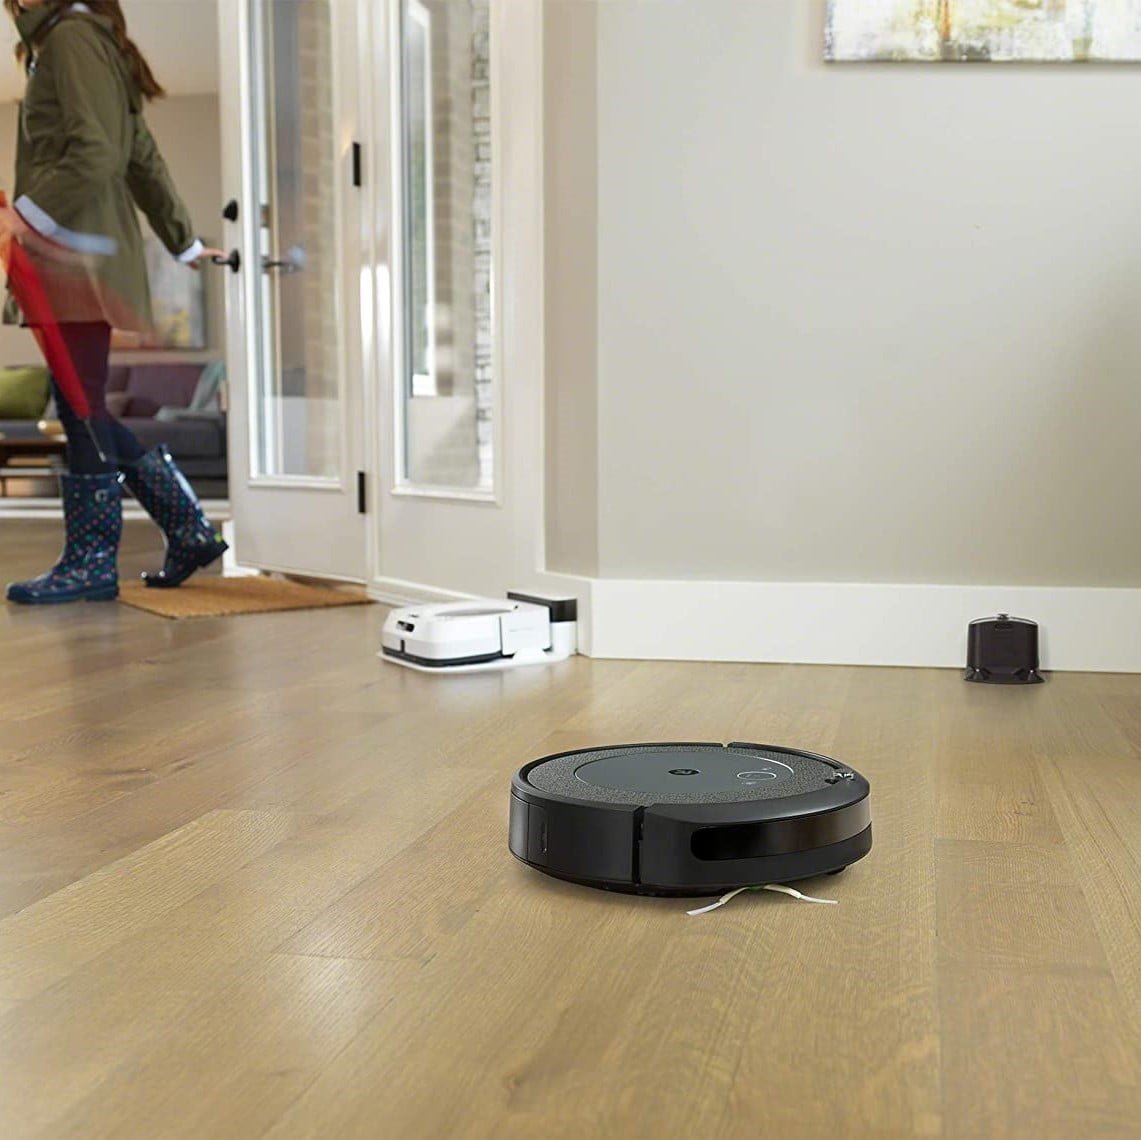 71X4B6Wal. Ac Sl1500 Irobot &Lt;H1 Id=&Quot;Title&Quot; Class=&Quot;A-Size-Large A-Spacing-None&Quot;&Gt;Irobot Roomba I3 Robot Vacuum&Lt;/H1&Gt; Https://Www.youtube.com/Watch?V=Lcgqd98Yfg8 * Irobot Roomba I3 Robot Vacuum * Imprint® Smart Mapping– Cleaning Room By Personalized Schedules, Cleans Specific Rooms At Your Voice Command * Navigation: Navigates In Neat Rows, Navigates Under And Around Furniture, Cliff Detect: Avoids Stairs * Smart Features: App Controlled, Work With Voice Command, Compatible With Alexa,Google,Ali Genie3 * Smart Recharge And Resume Feature: When Battery Gets Low, The Robot Finds Its Base &Amp; Completely Recharges, Then Resumes Cleaning Where It Left Off. * Cleaning Features: Suction Power 10X, Dirt Detect™ Technology, Dual Multi-Surface Brushes, Advanced Sensors Optimize Cleaning, Edge-Sweeping Brush, High-Efficiency Filter. * Customization Features: Personalized Schedule Recommendations, Creates Favorite Cleaning Routines, Pet-Shedding Cleaning Suggestions &Lt;Pre&Gt;Warranty: 2 Years On Robot, 1 Year On Battery&Lt;/Pre&Gt; Irobot Roomba I3 Robot Vacuum Irobot Roomba I3 Robot Vacuum - I315840